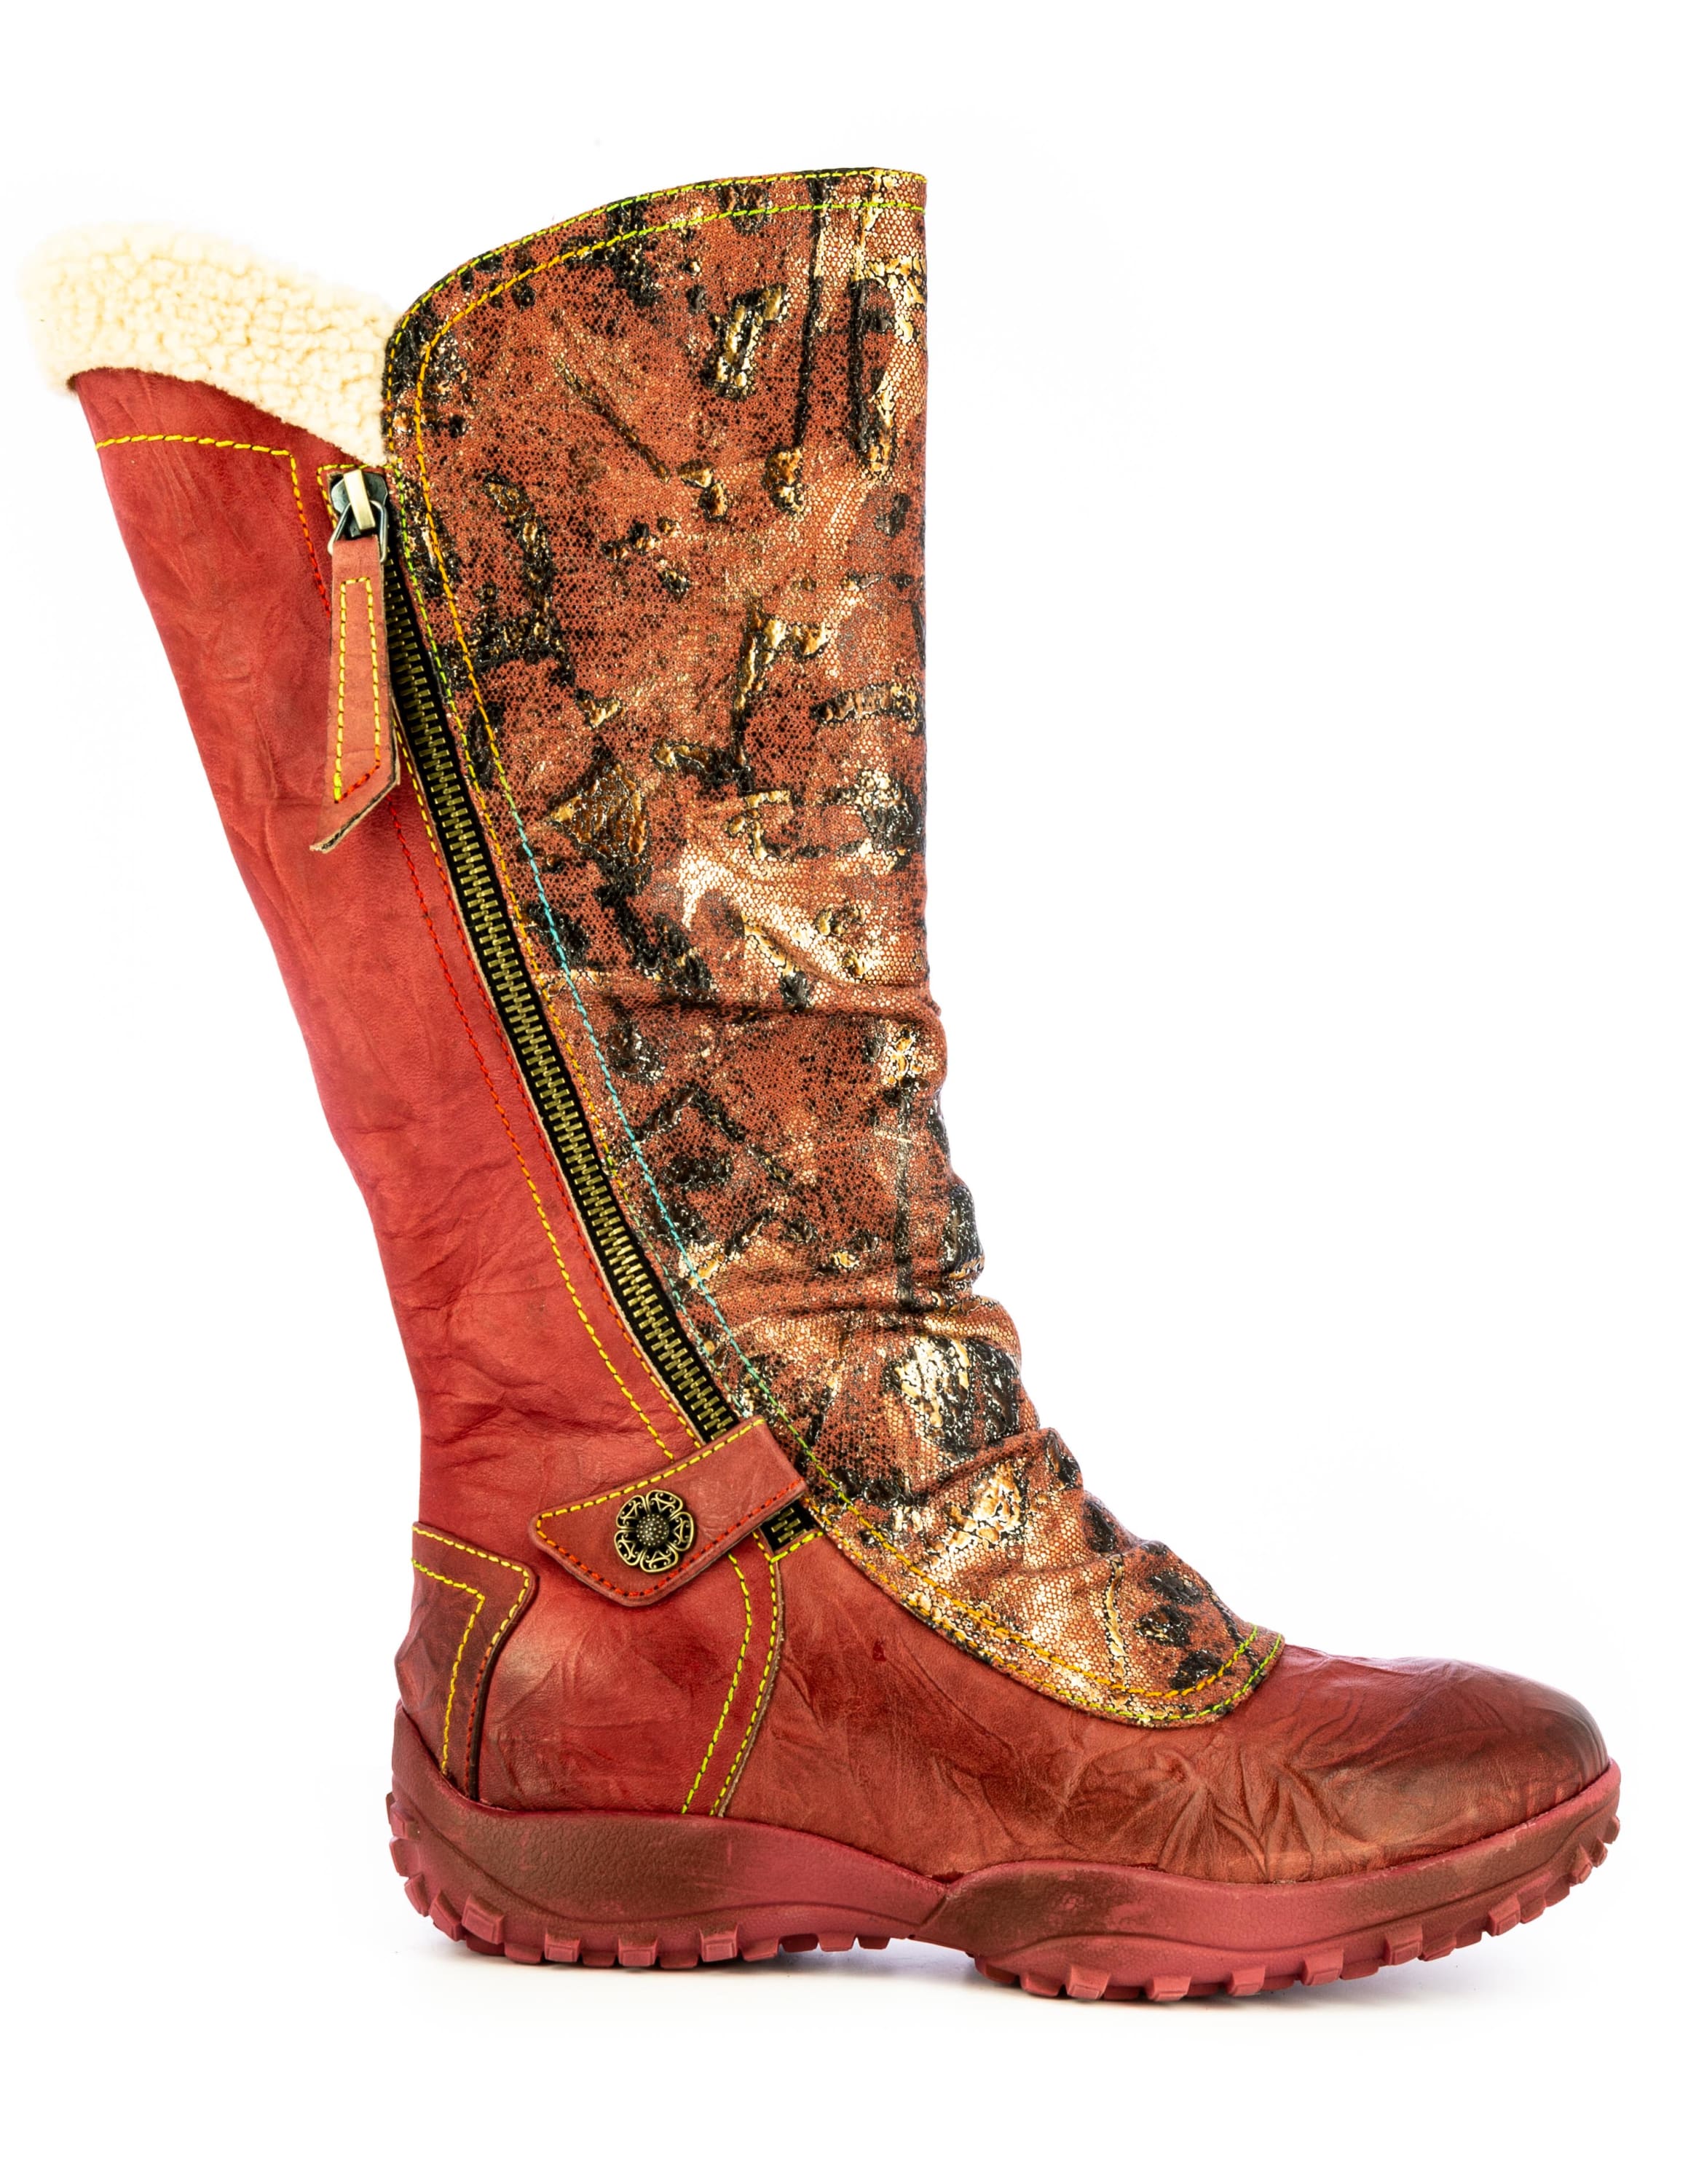 CYCNTHIAO 55 - 35 / Red - Boot